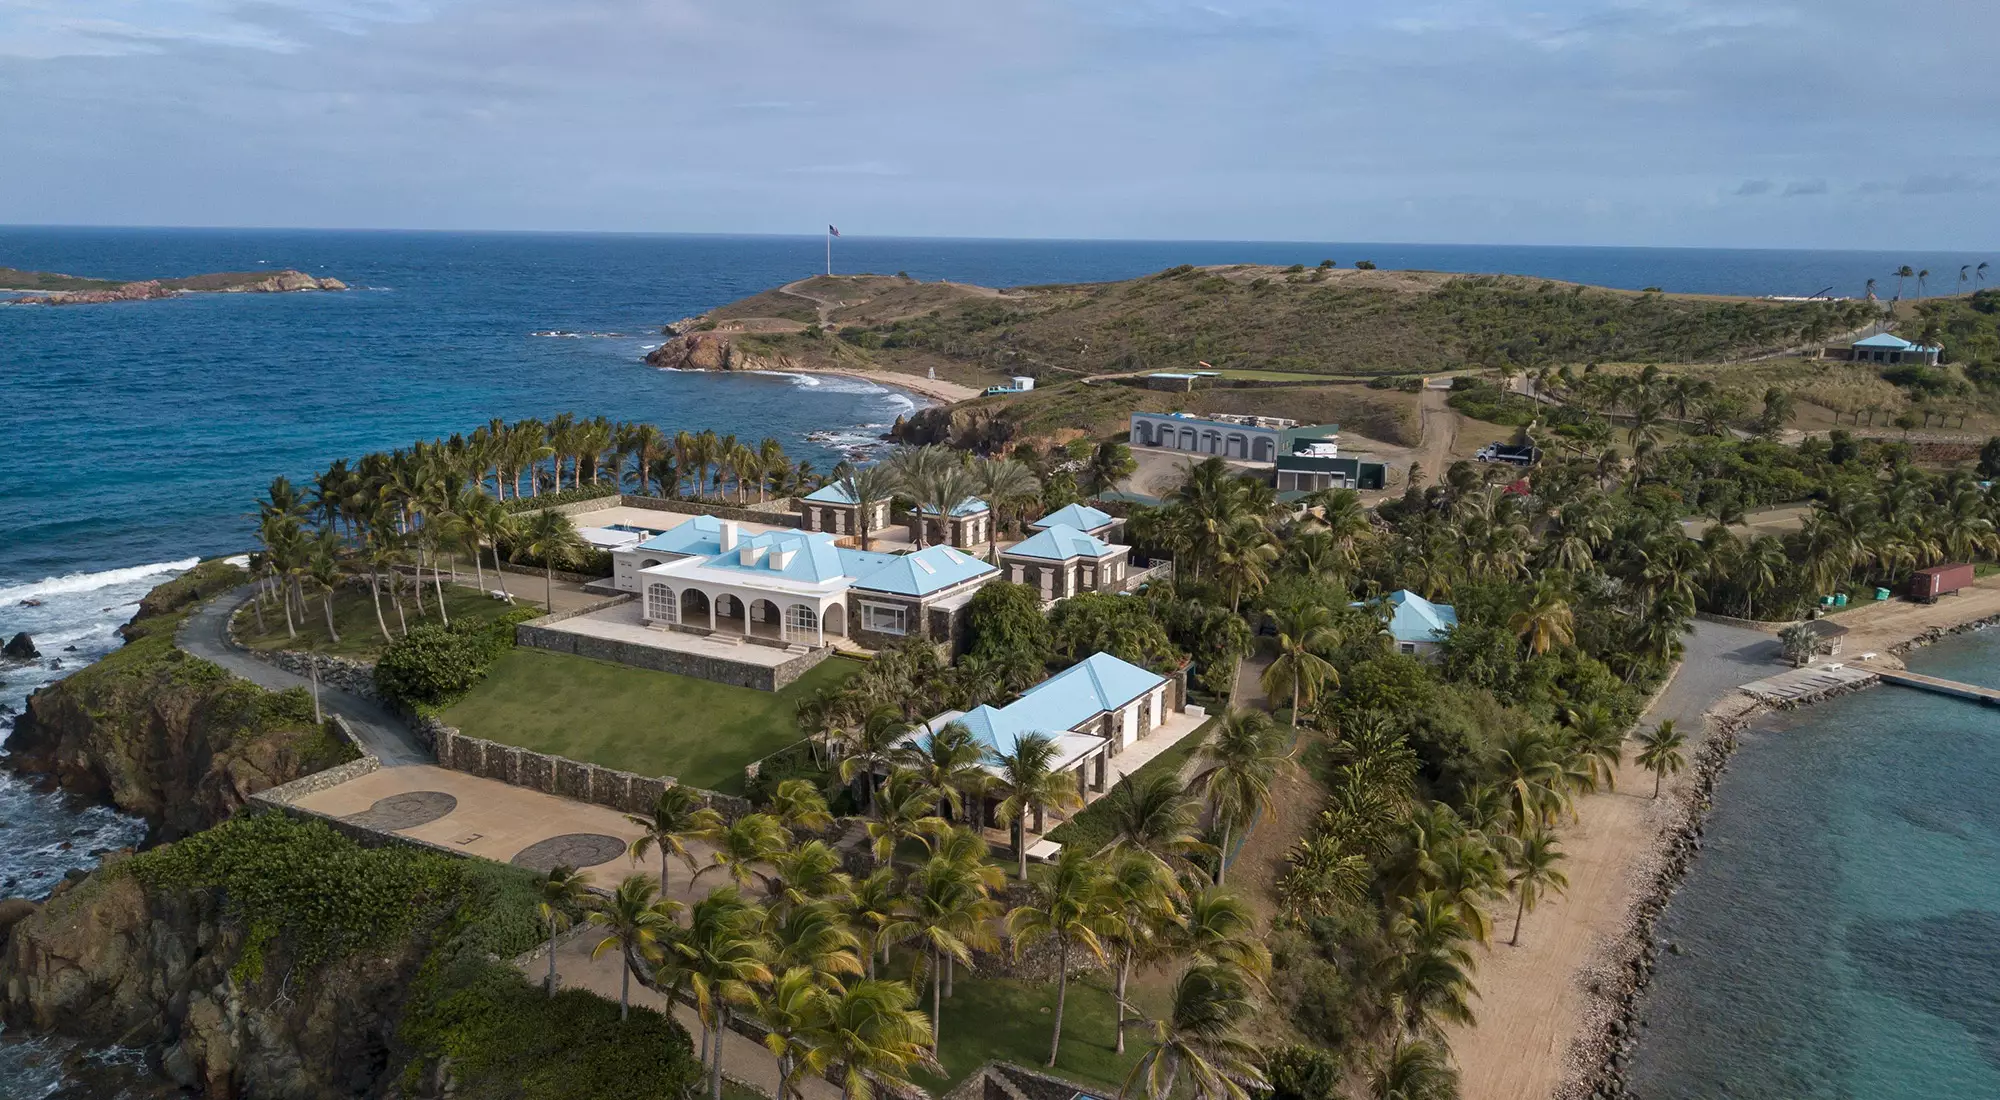 Jeffrey Epstein owned Little St. James island in the Virgin Islands where much of his abuse took place (